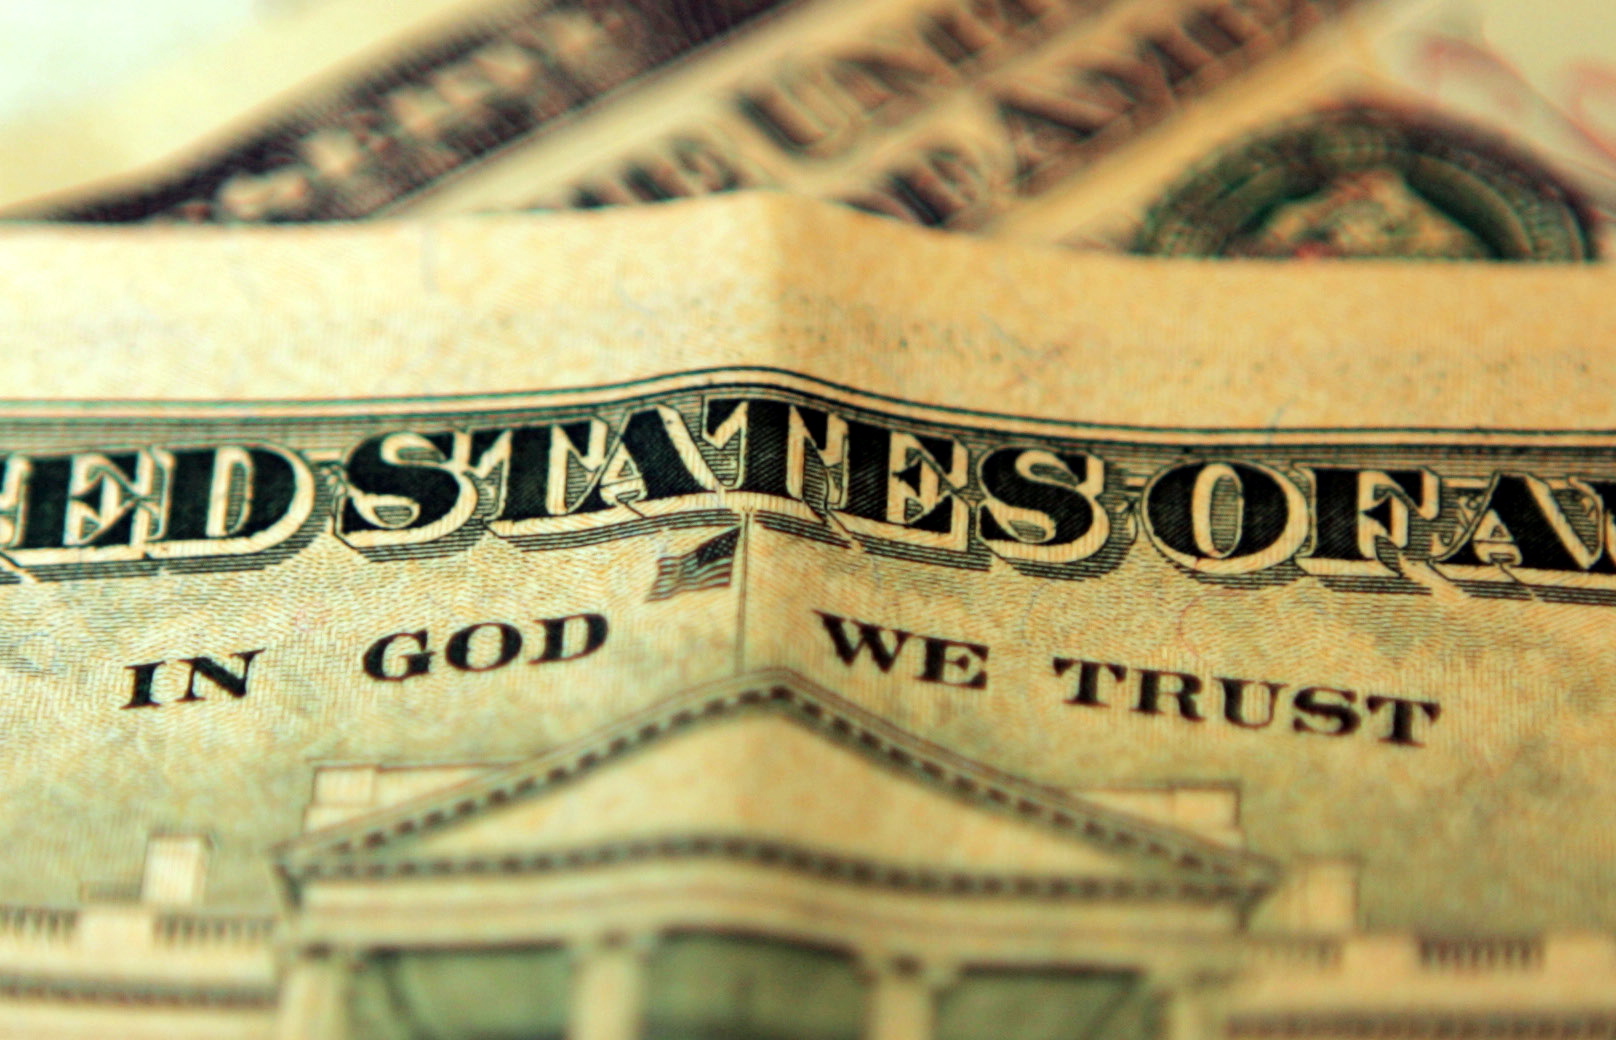 LONDON, UNITED KINGDOM - OCTOBER 23: In this photo illustration the phrase "In God We Trust"  can be seen on an American ten dollar bill on October 23, 2008 in London, England. The British pound has hit it's lowest point against the Dollar in five years as it fell to just above 1.62 US Dollars after fears of a recession were acknowledged by the government and financial experts today.  (Photo by Hugh Pinney/Getty Images)